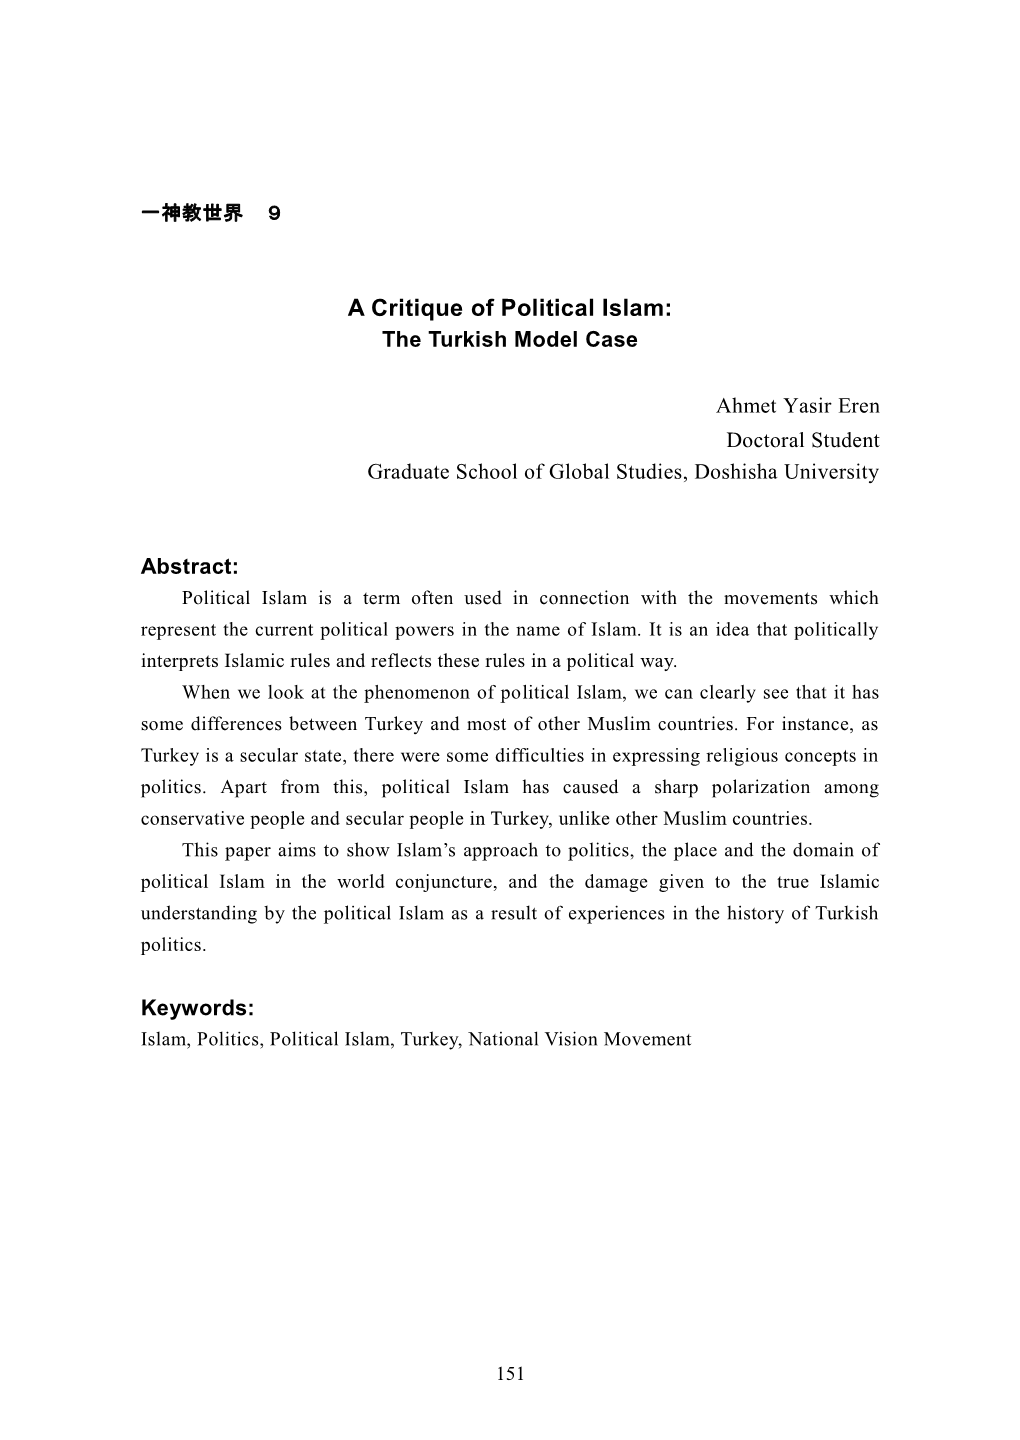 A Critique of Political Islam: the Turkish Model Case